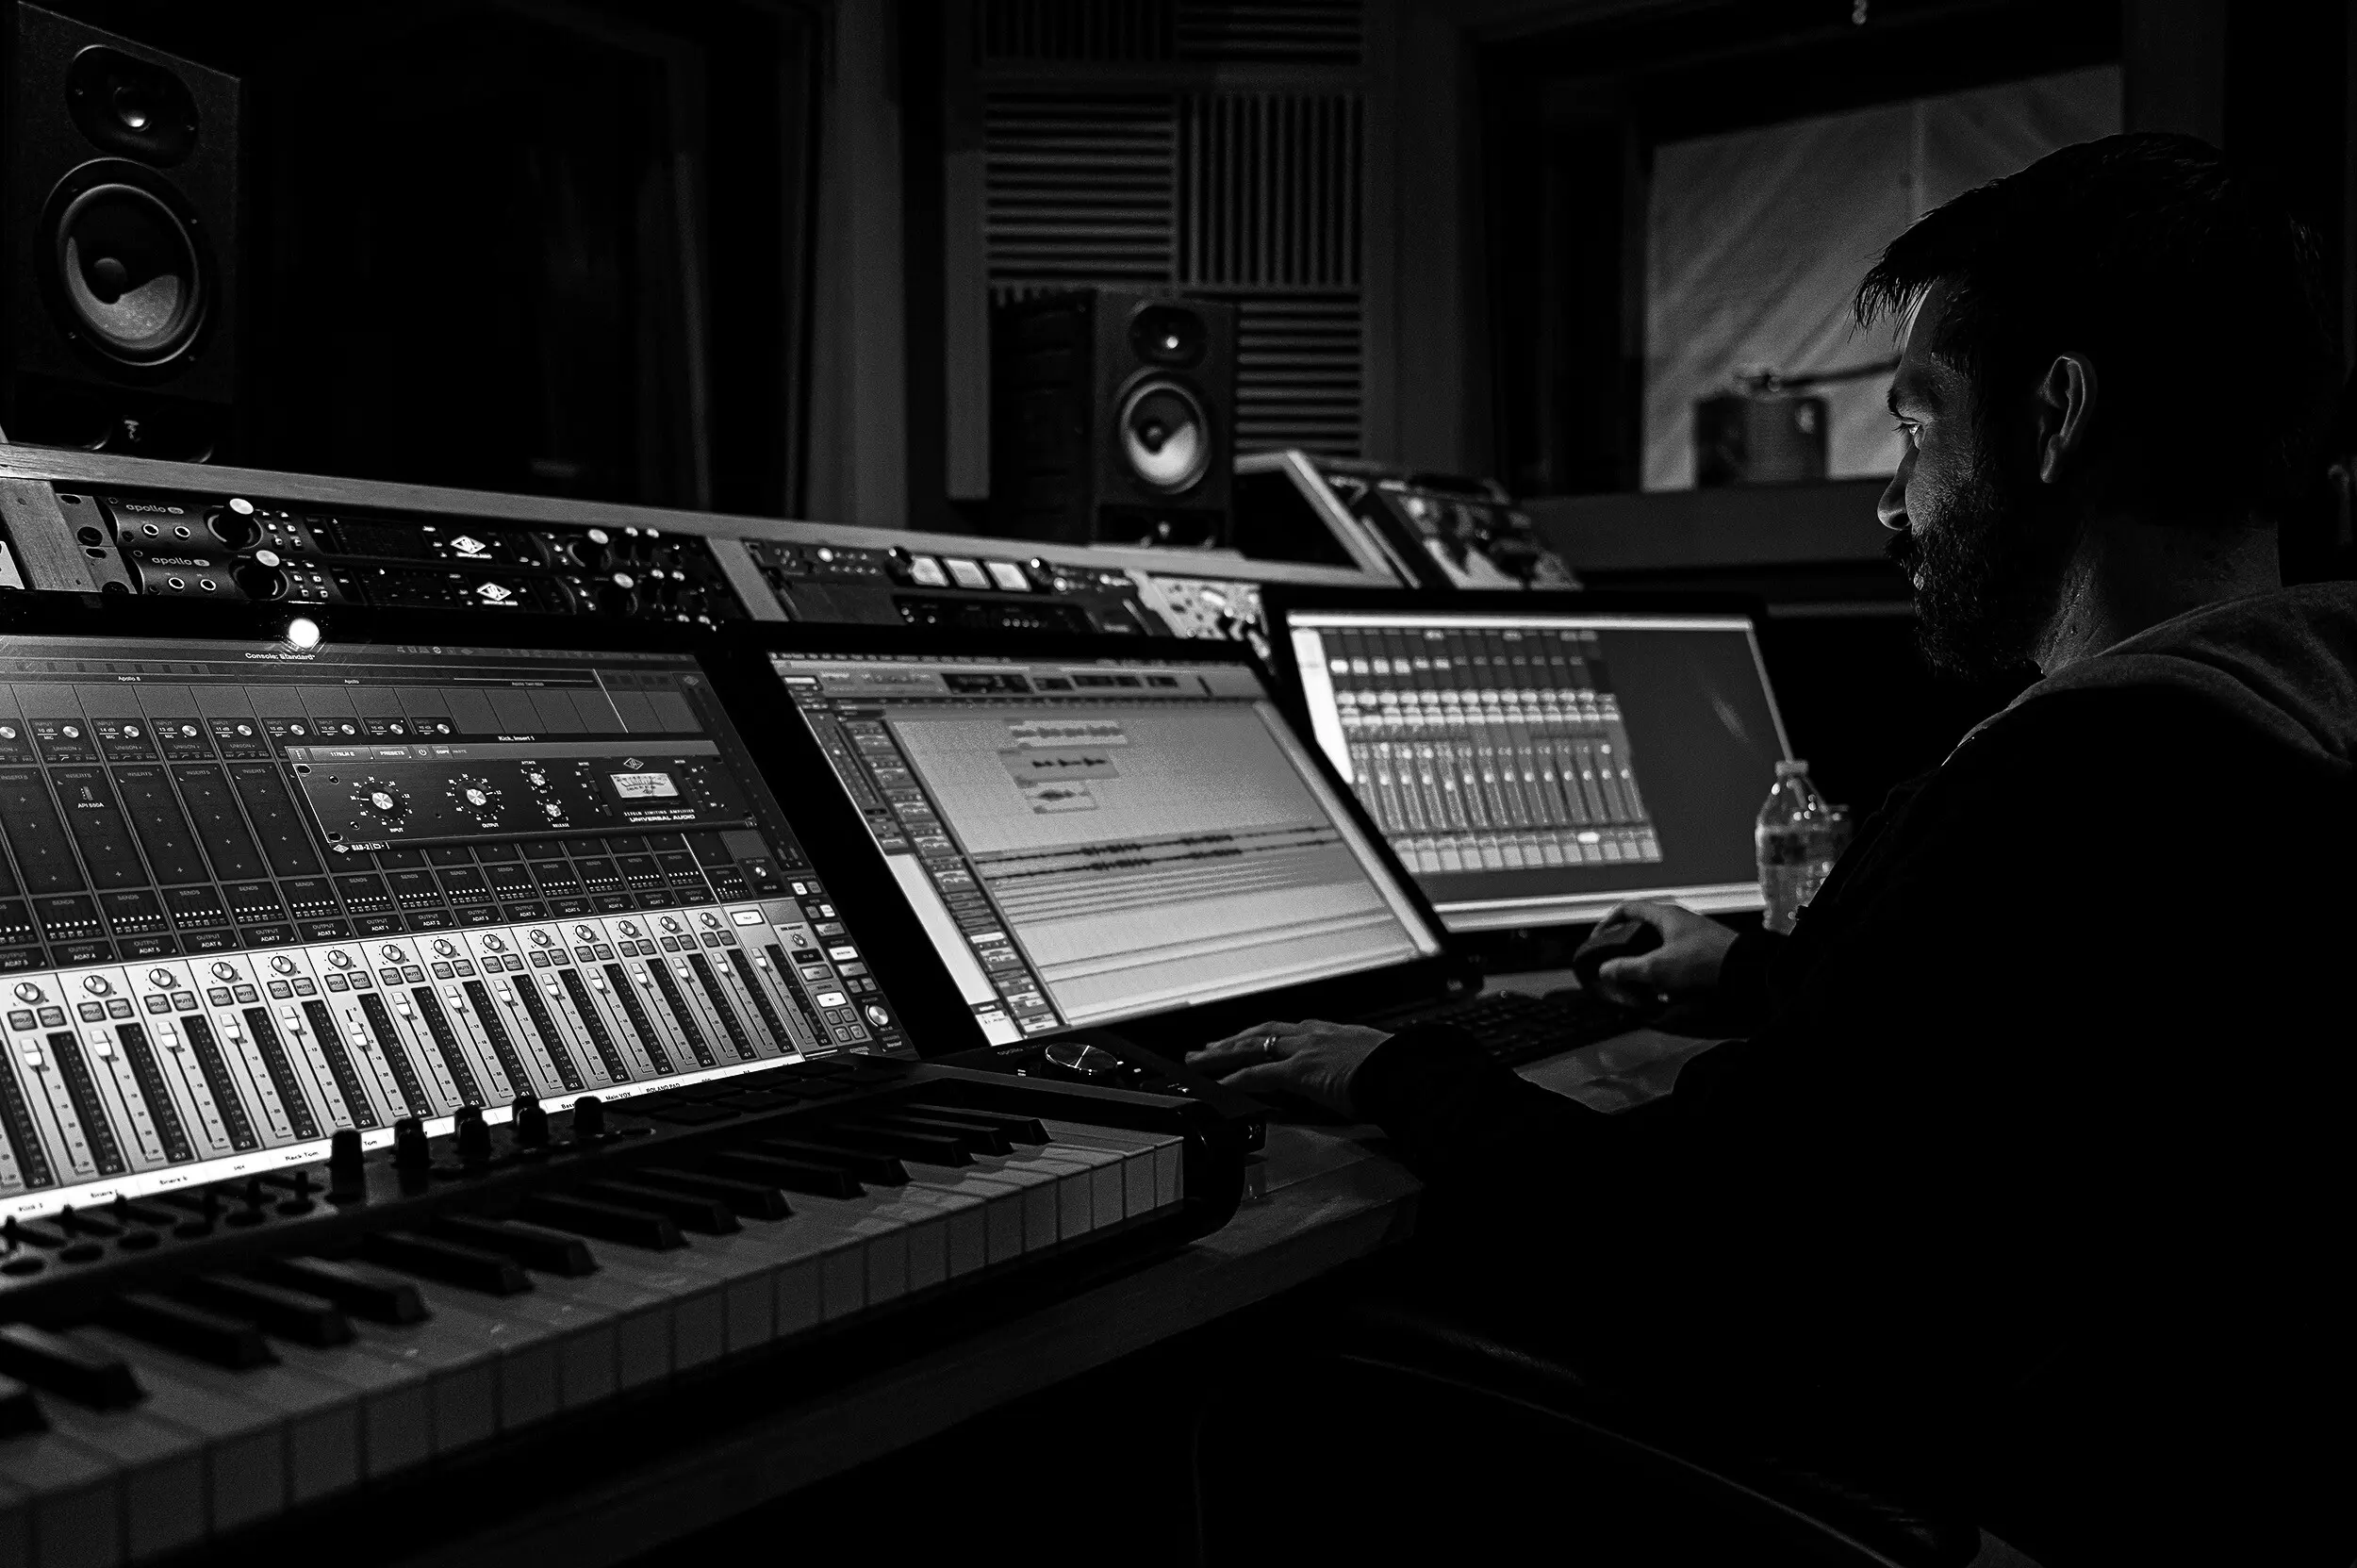 "24-Bit" in digital audio designates a bit depth of 24, which leads to a wide dynamic range and precise sound reproduction. It's the industry standard, particularly for recording, mixing, and mastering.